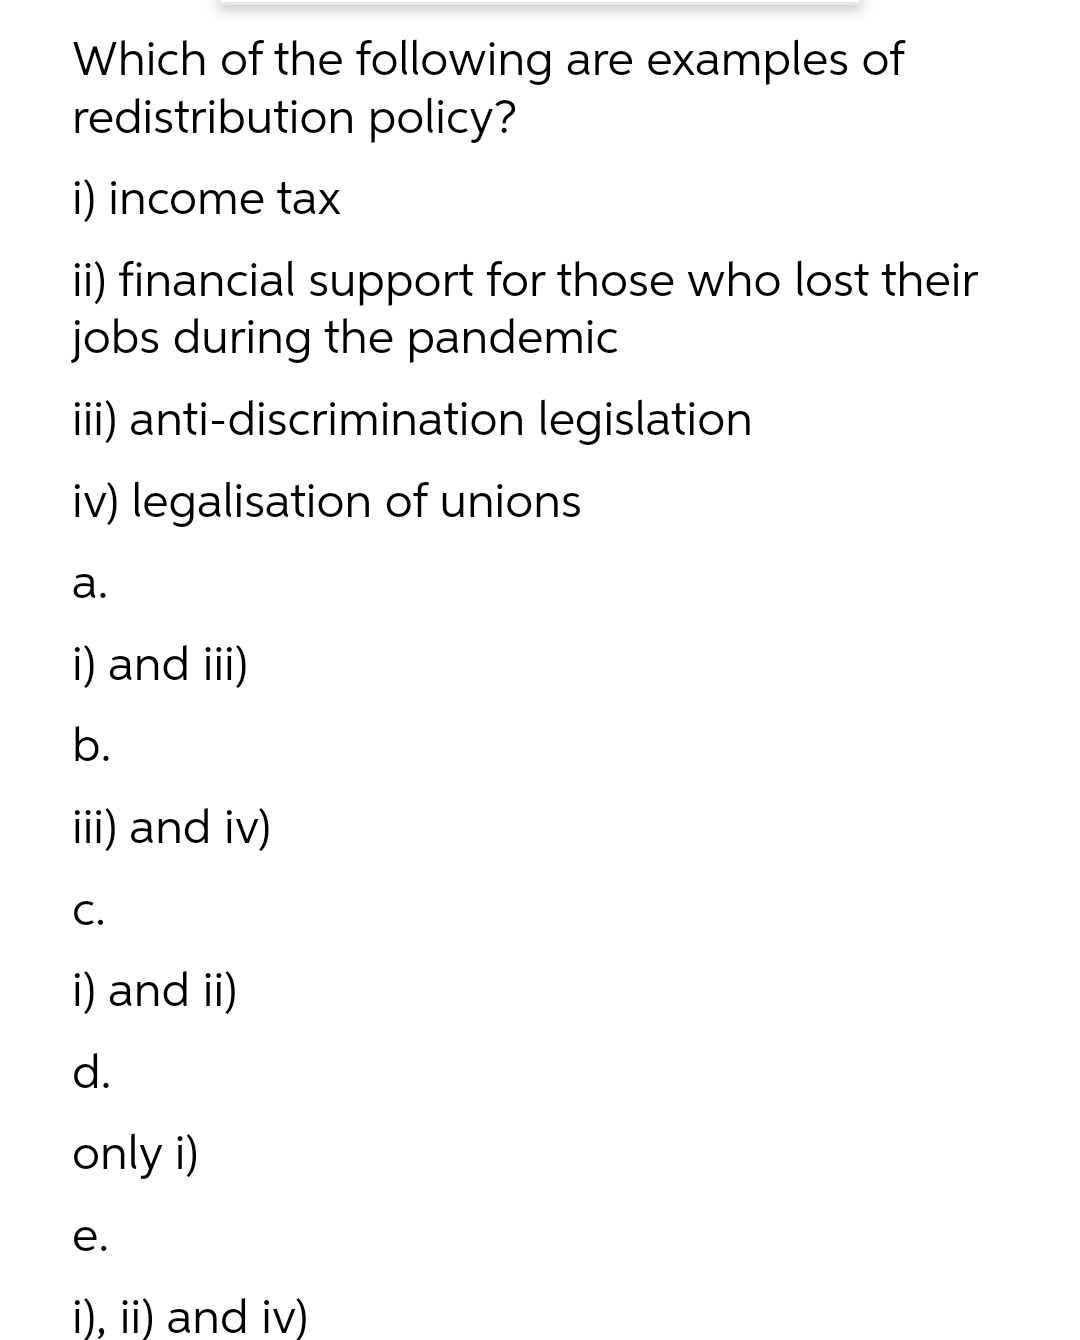 Which of the following are examples of
redistribution policy?
i) income tax
ii) financial support for those who lost their
jobs during the pandemic
iii) anti-discrimination legislation
iv) legalisation of unions
a.
i) and iii)
b.
iii) and iv)
C.
i) and ii)
d.
only i)
e.
i), ii) and iv)